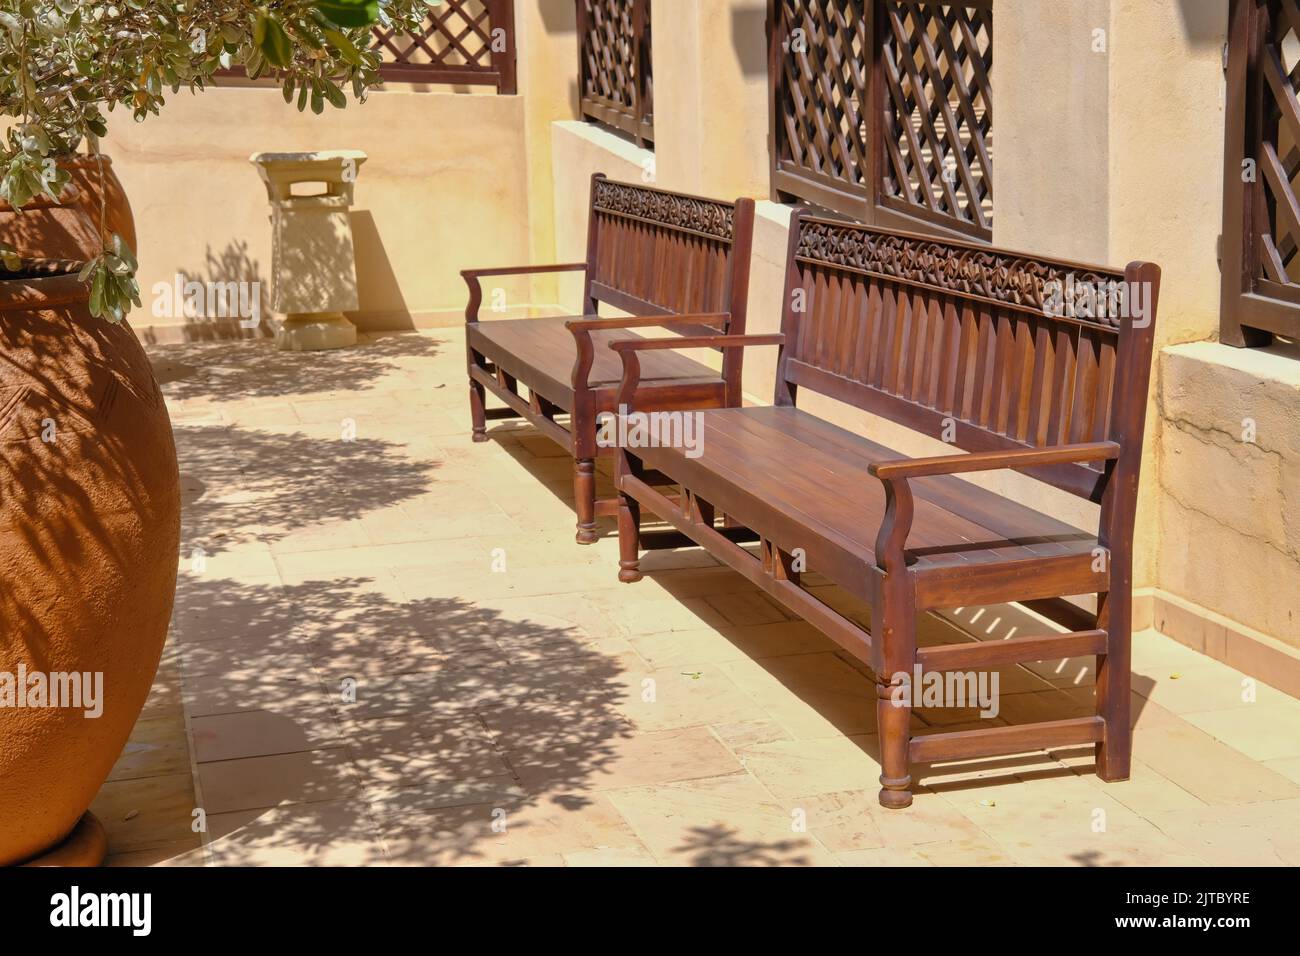 Orient wooden bench handmade with carved ornamental arabesque floral pattern in inner courtyard of middle eastern villa Stock Photo